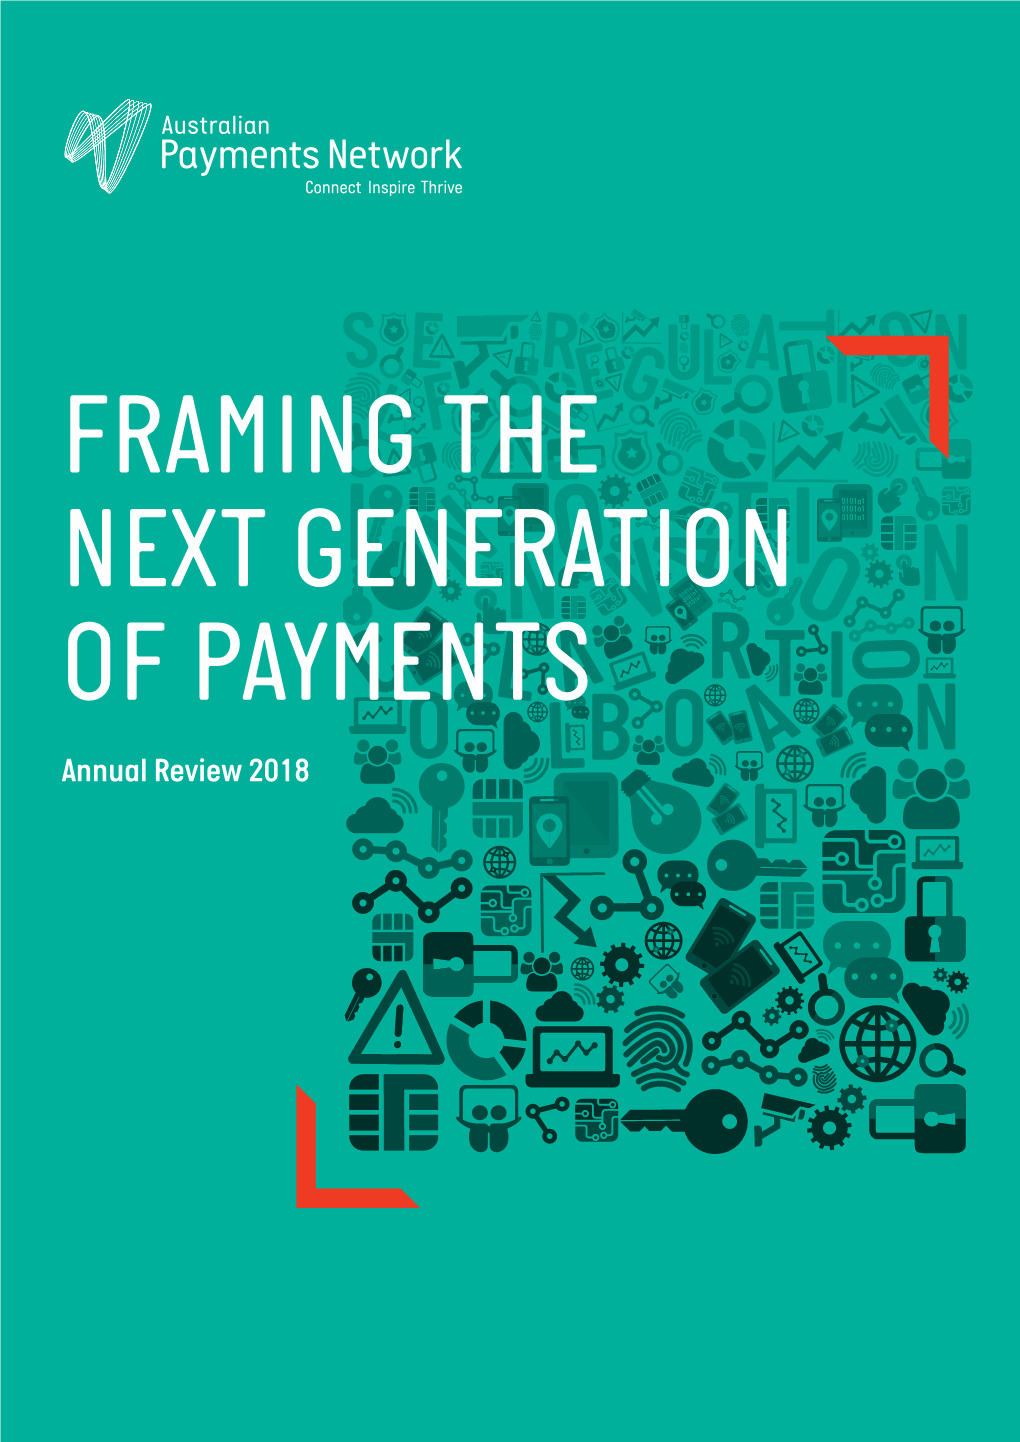 Framing the Next Generation of Payments